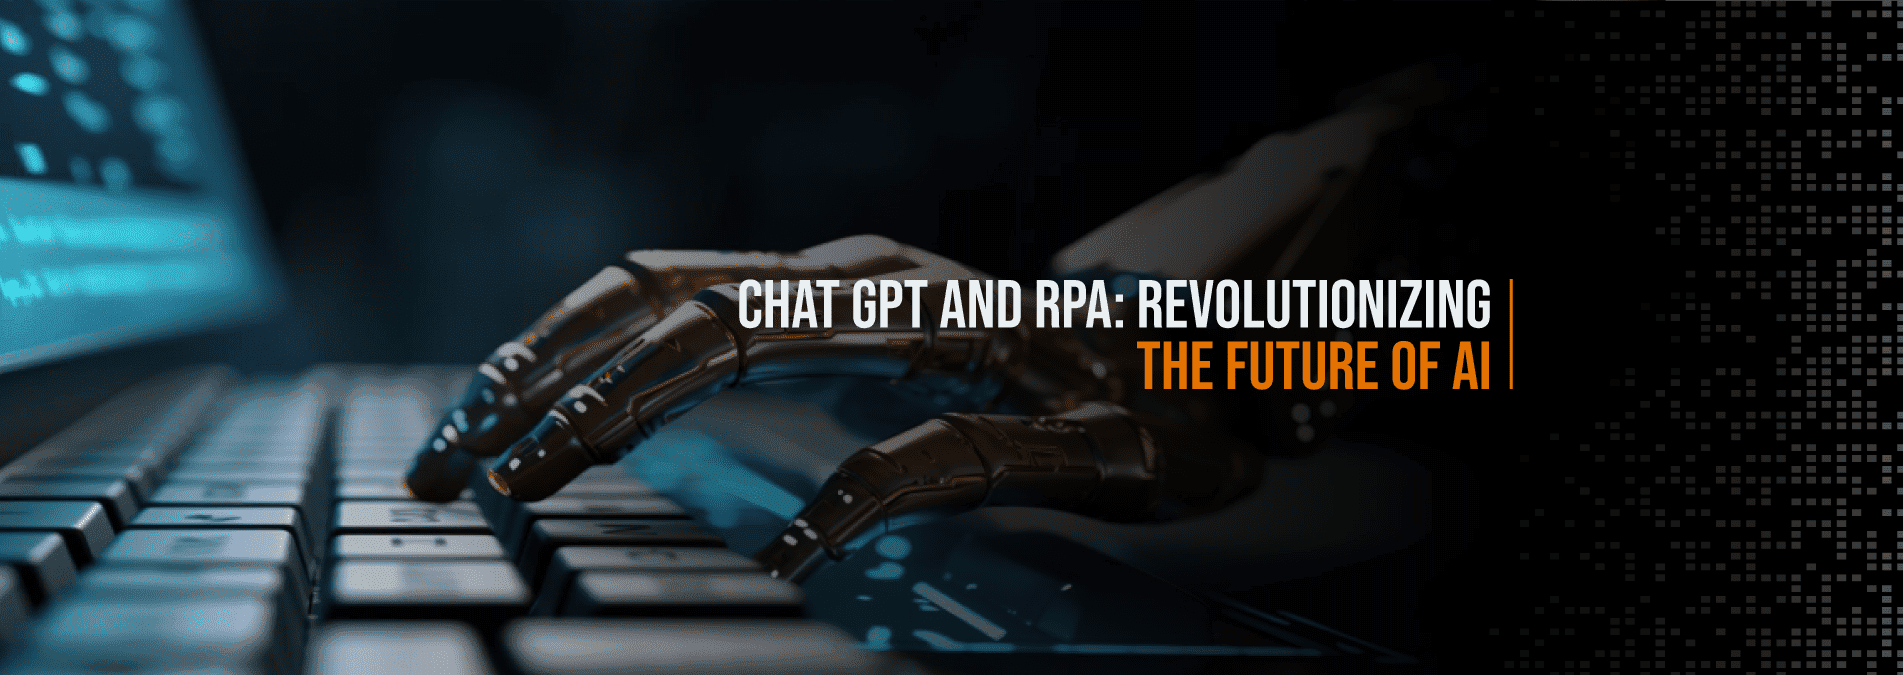 ChatGPT-and-RPA-Revolutionizing-the-Future-of